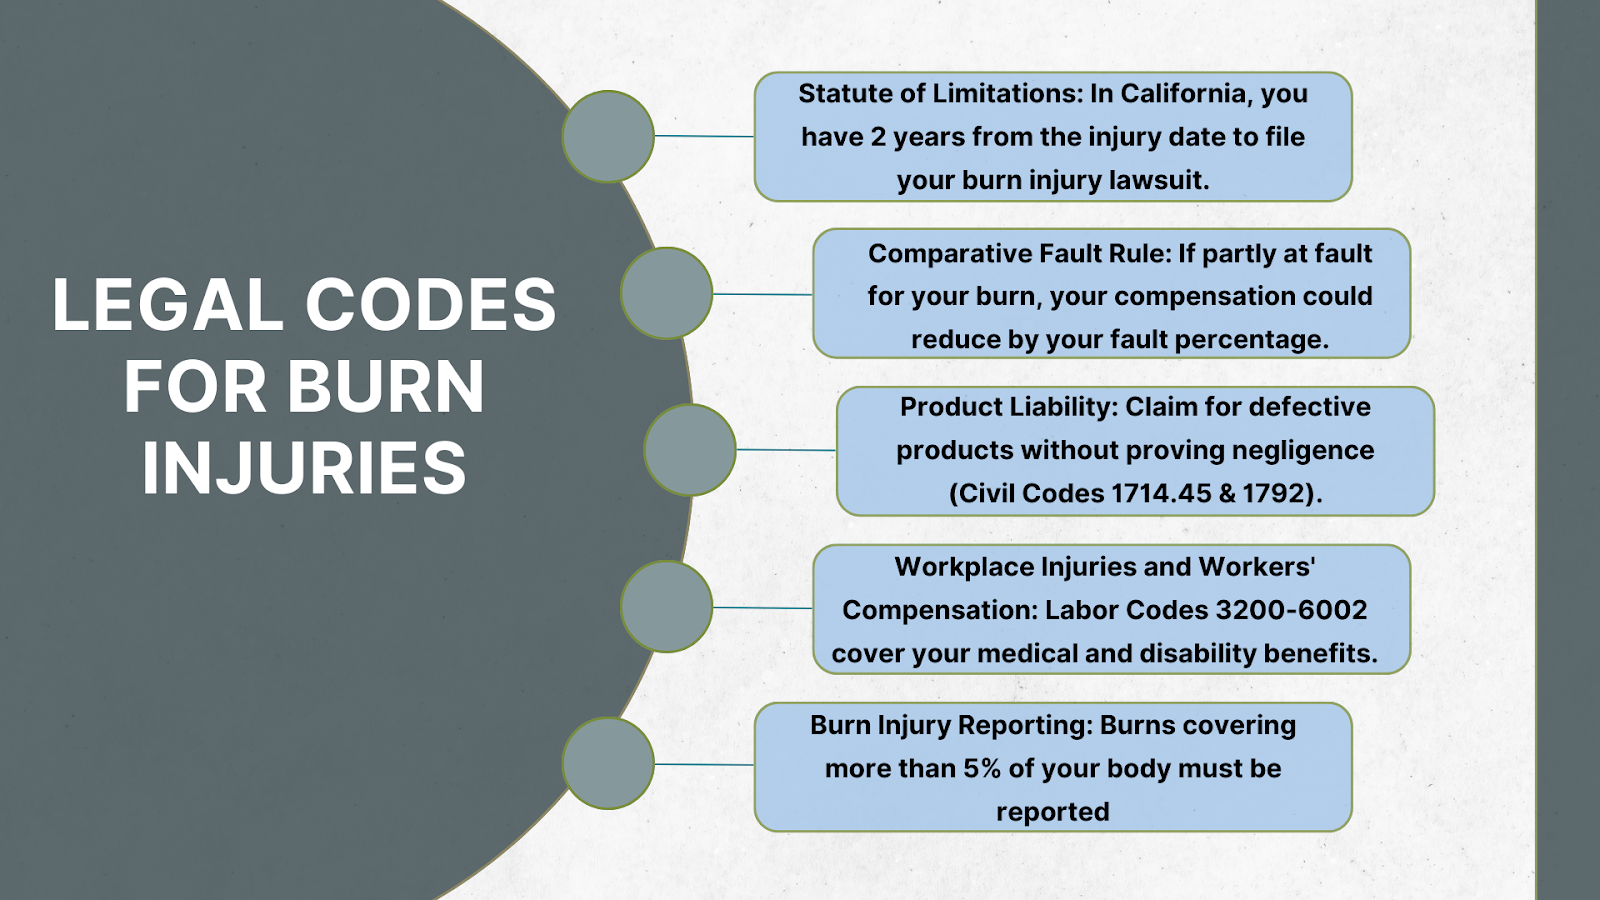 Legal Codes for Burn Injuries